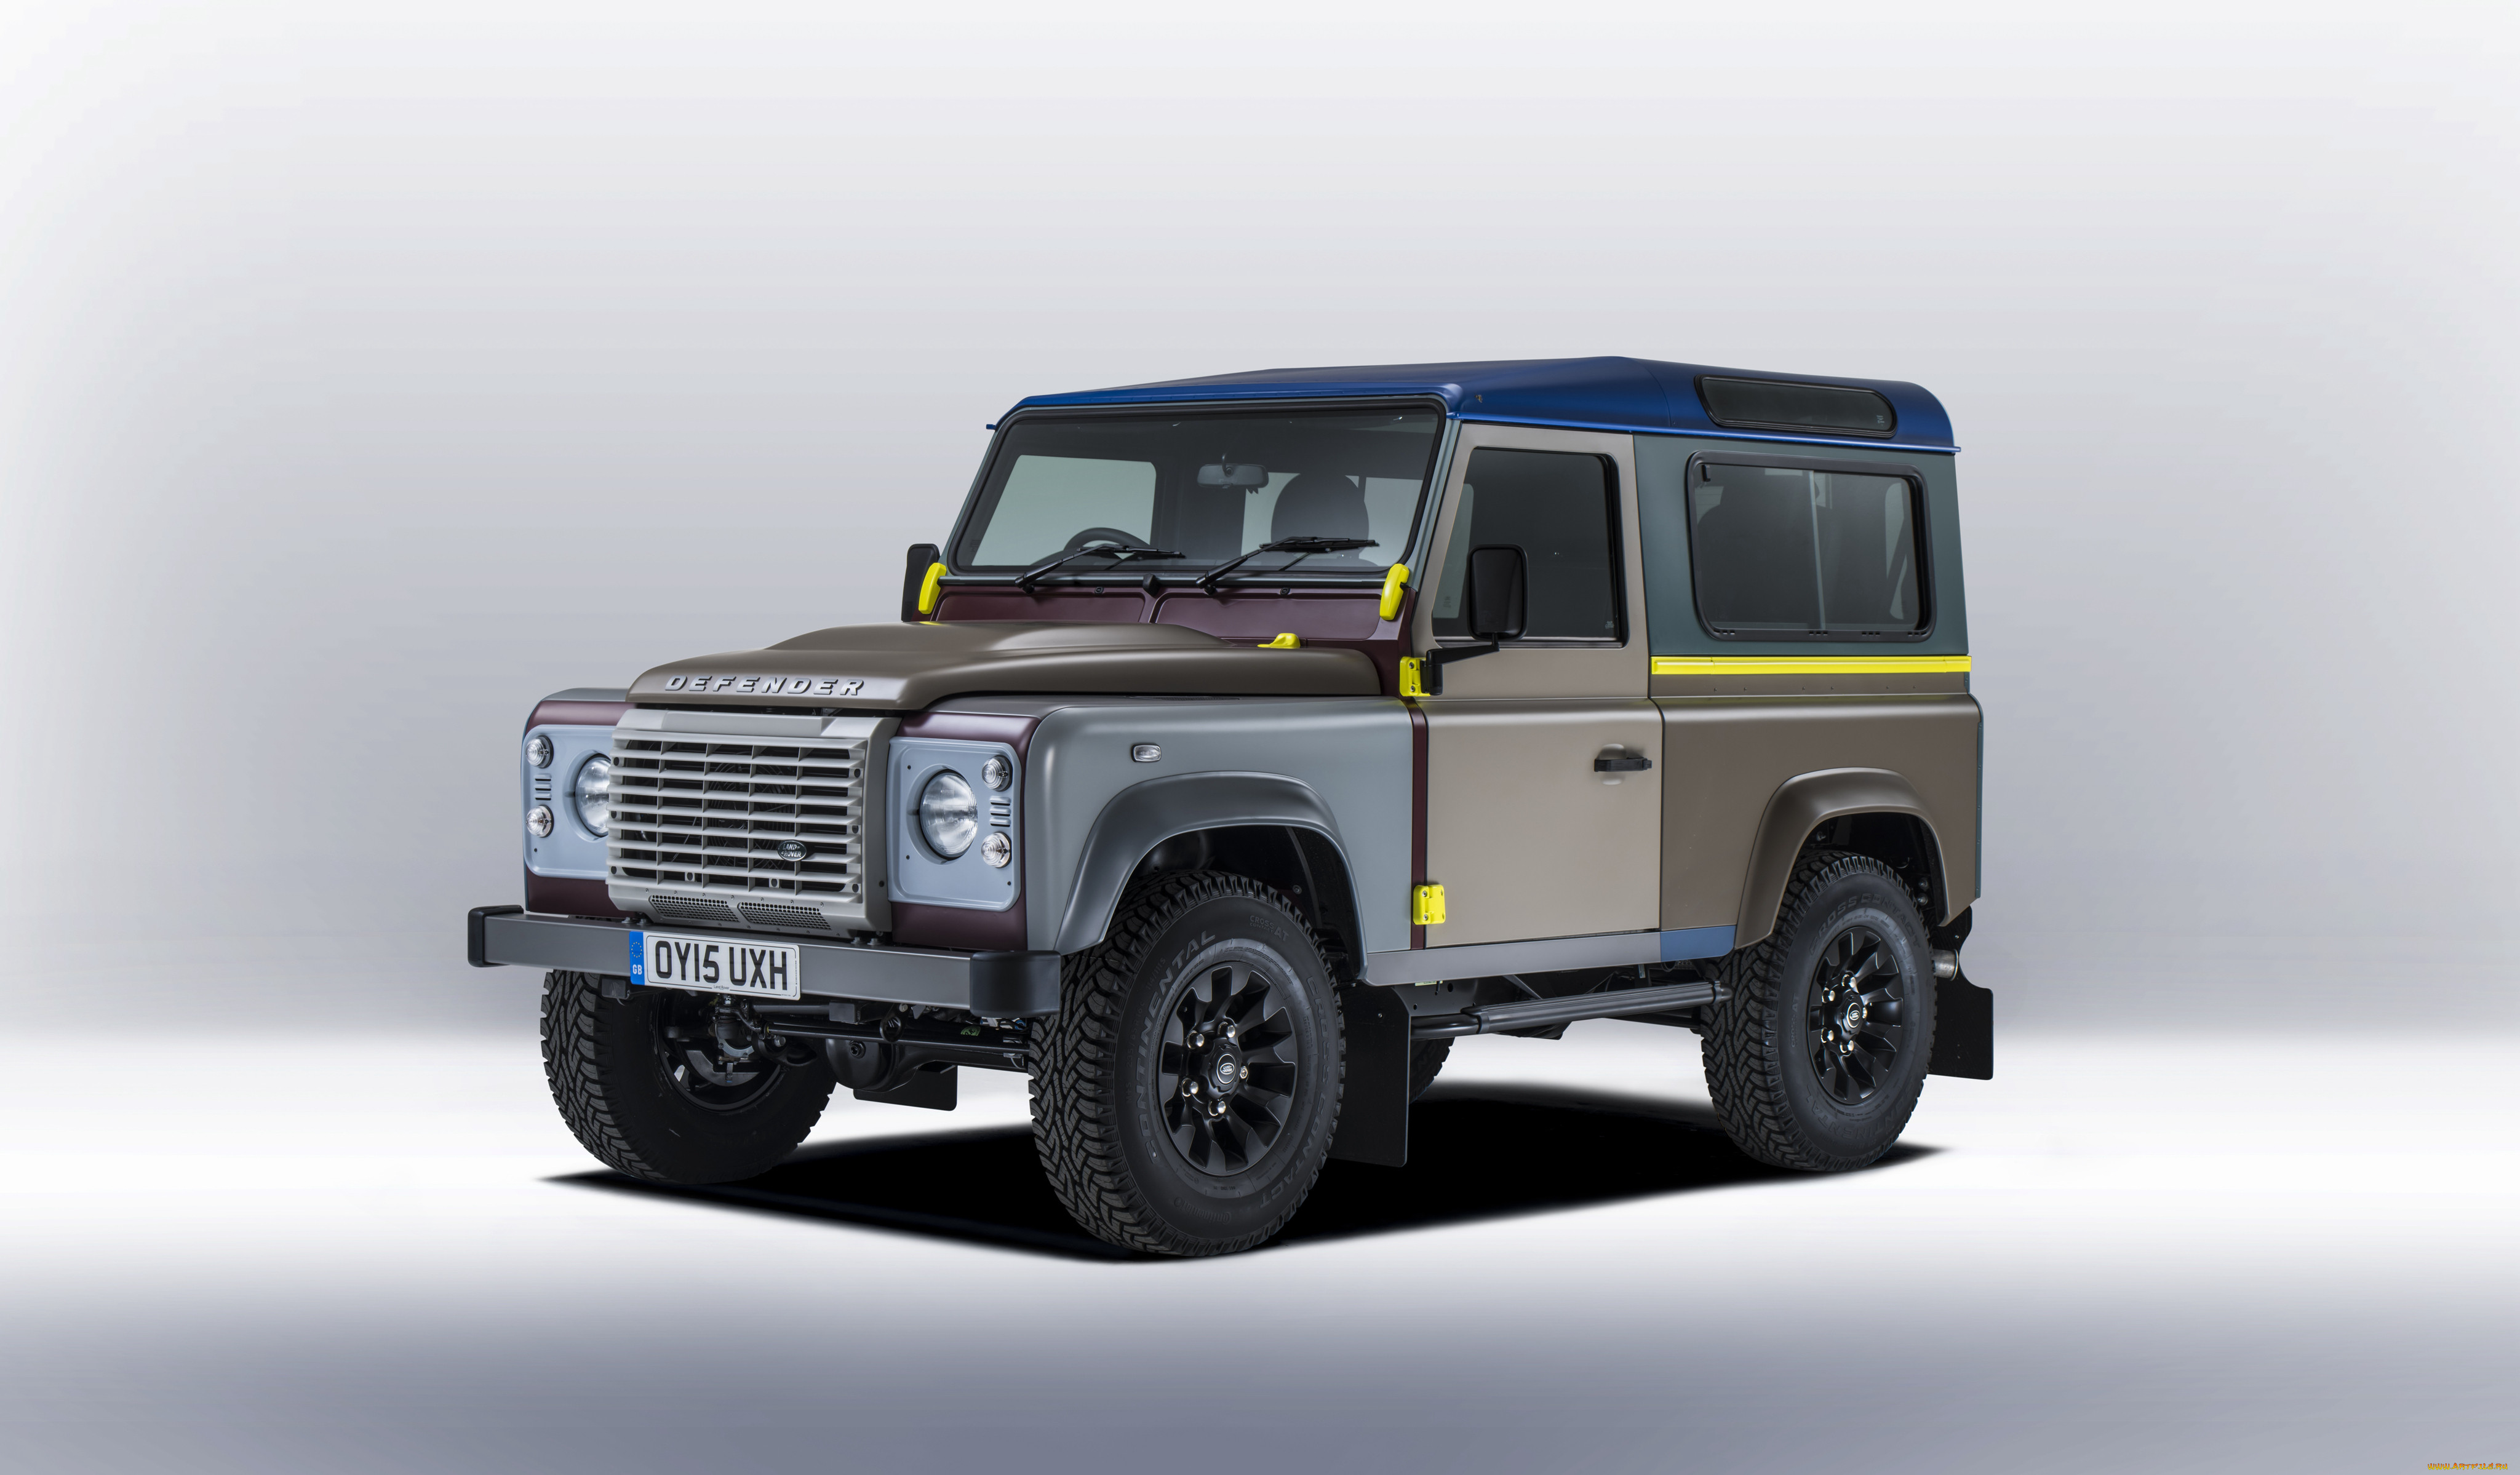 , land-rover, land, rover, defender, 90, by, paul, smith, 2015